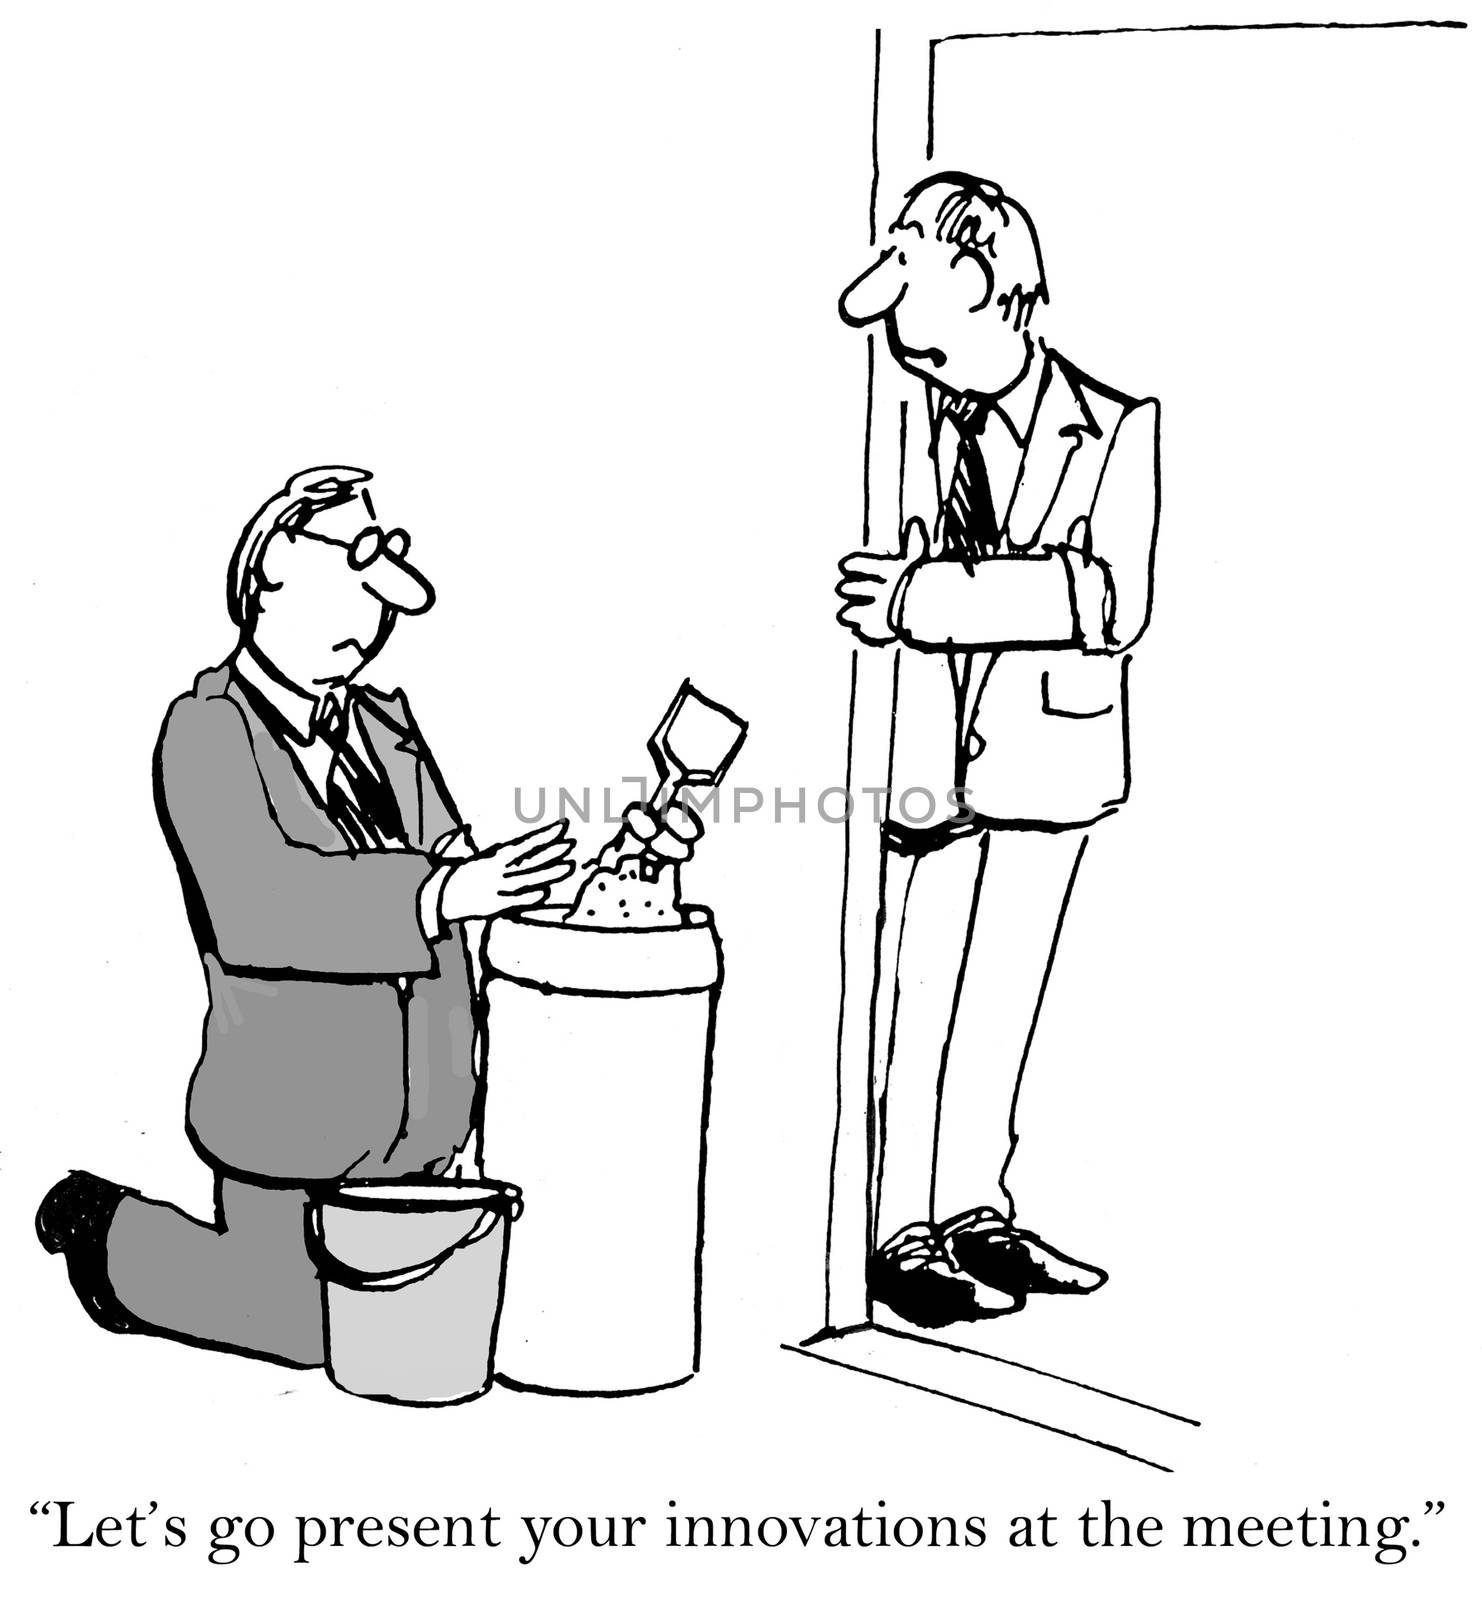 "Let's go present your innovations at the meeting."